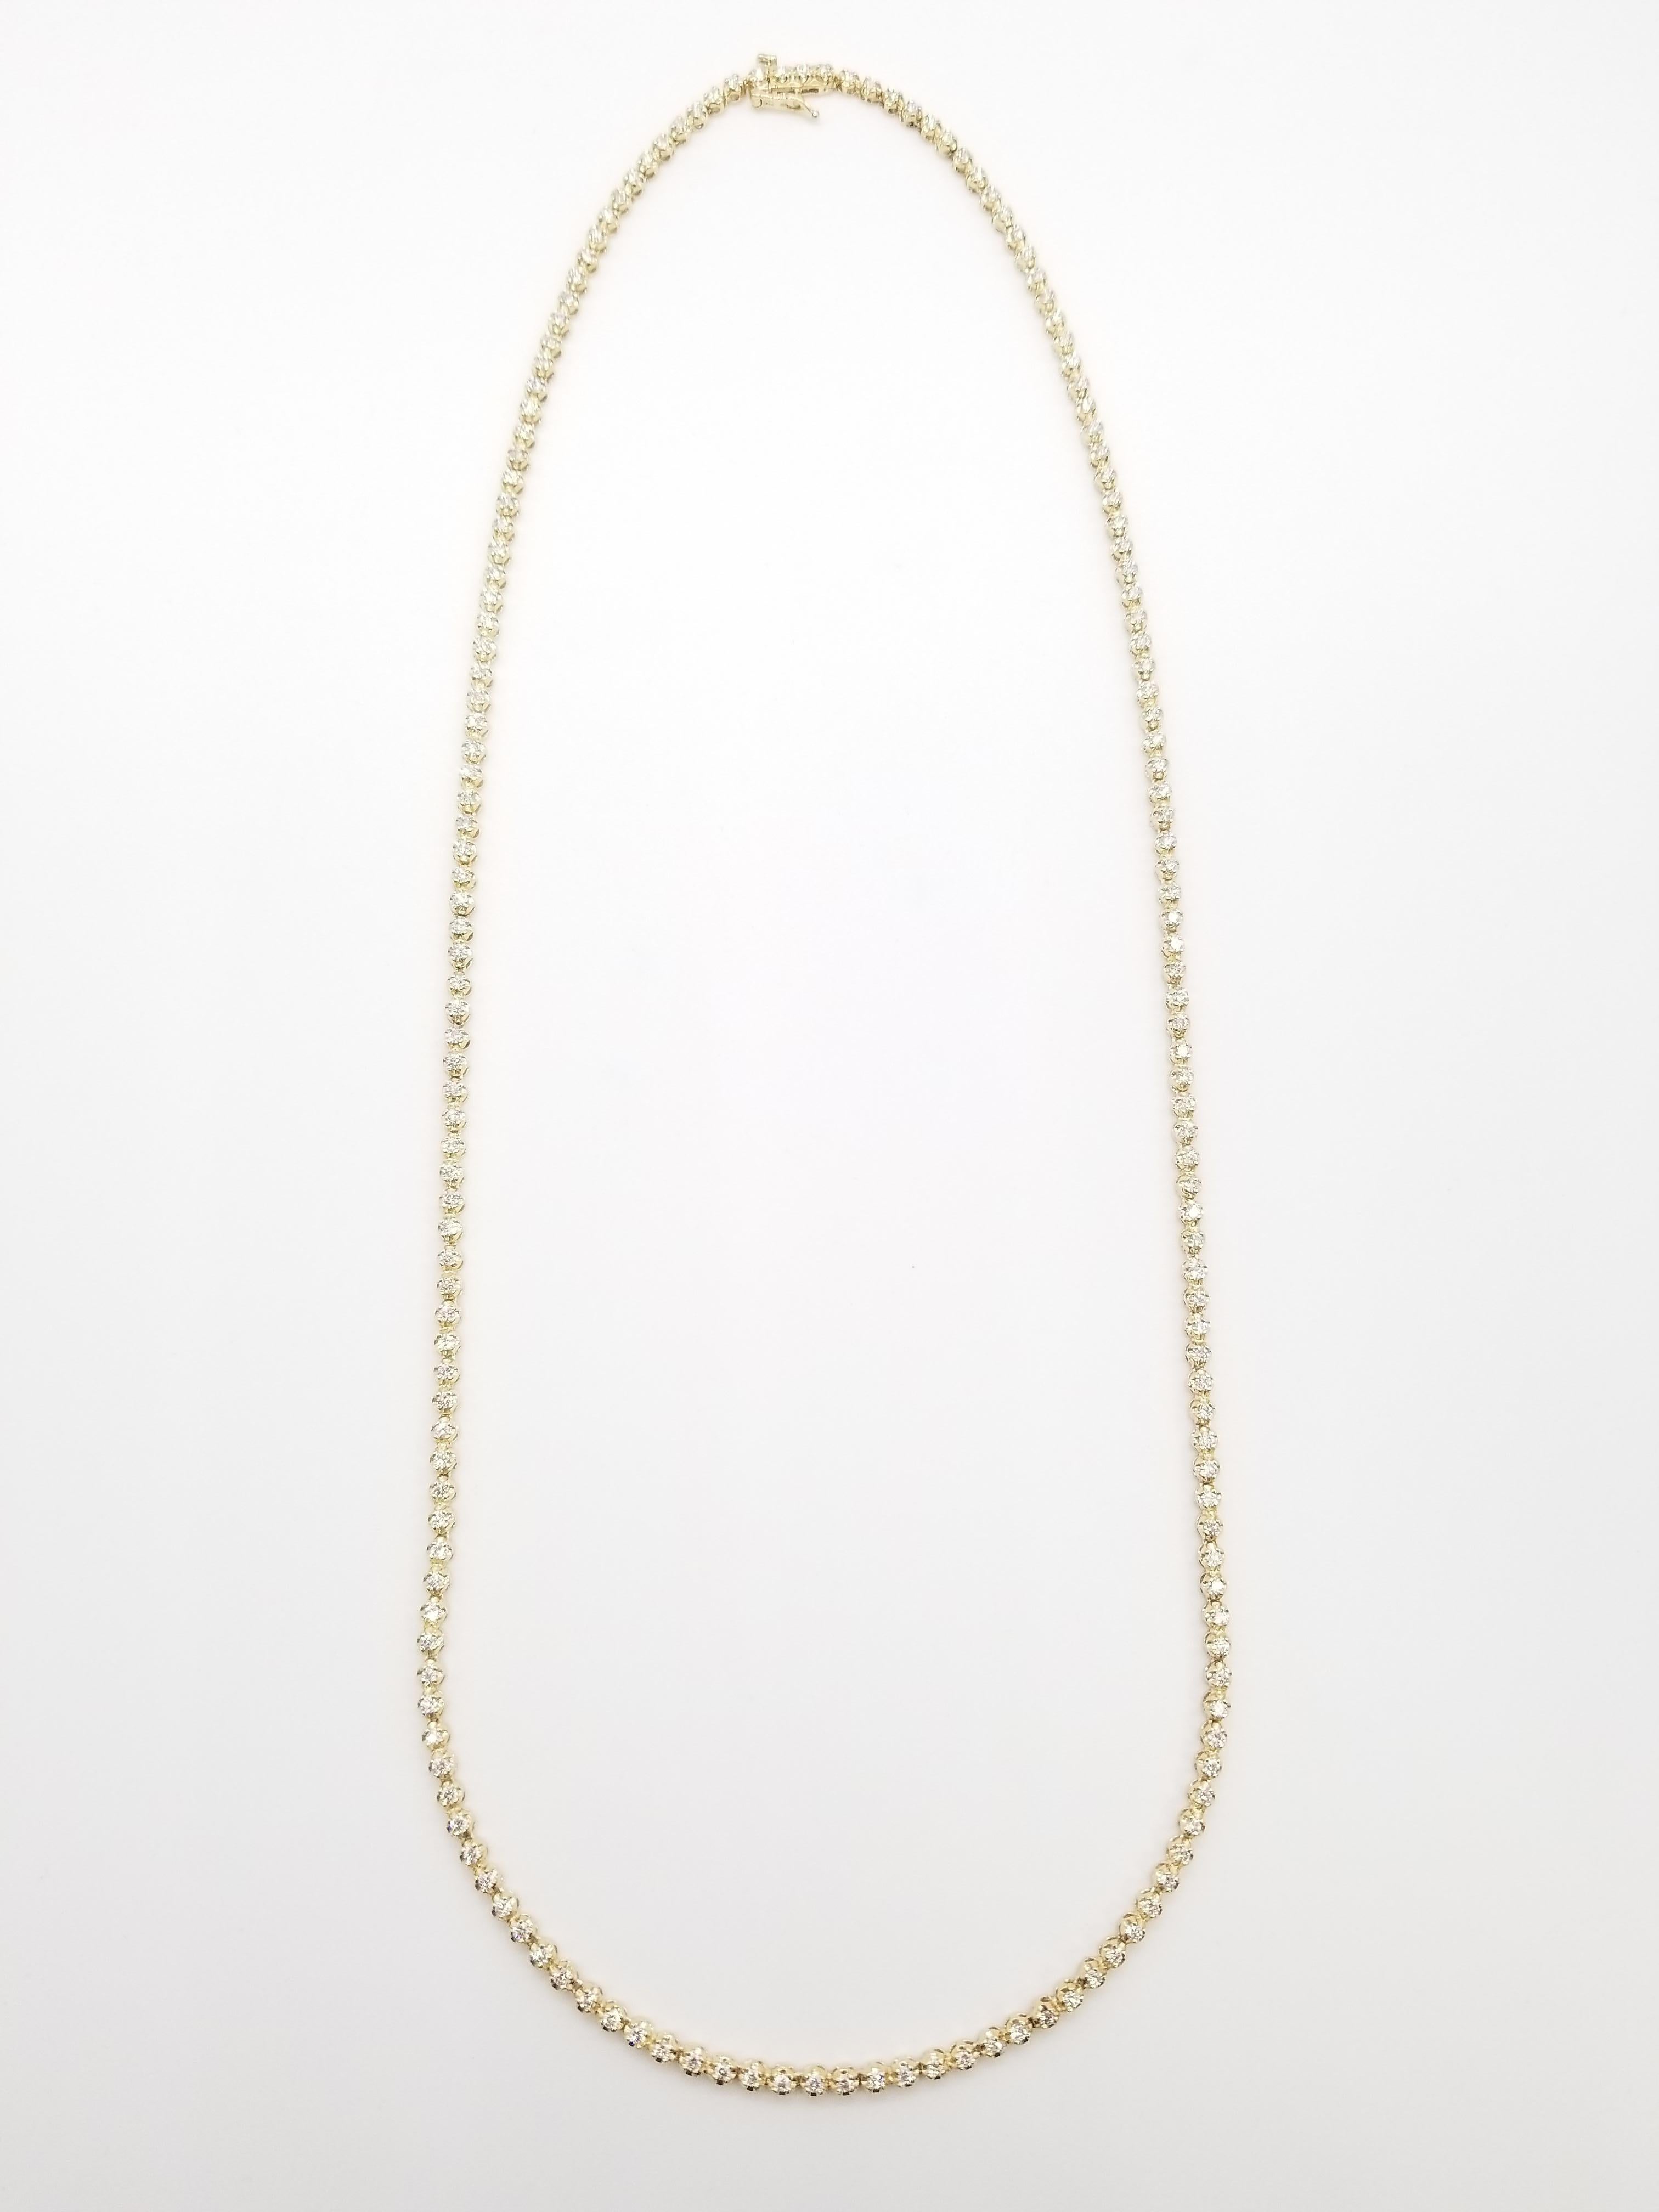 Brilliant and beautiful buttercup necklace, natural round-brilliant cut white diamonds clean and excellent shine. 14k yellow gold buttercup setting. 
22 inch length. Average H-I Color, VS-SI Clarity. Elegance for every occasion.